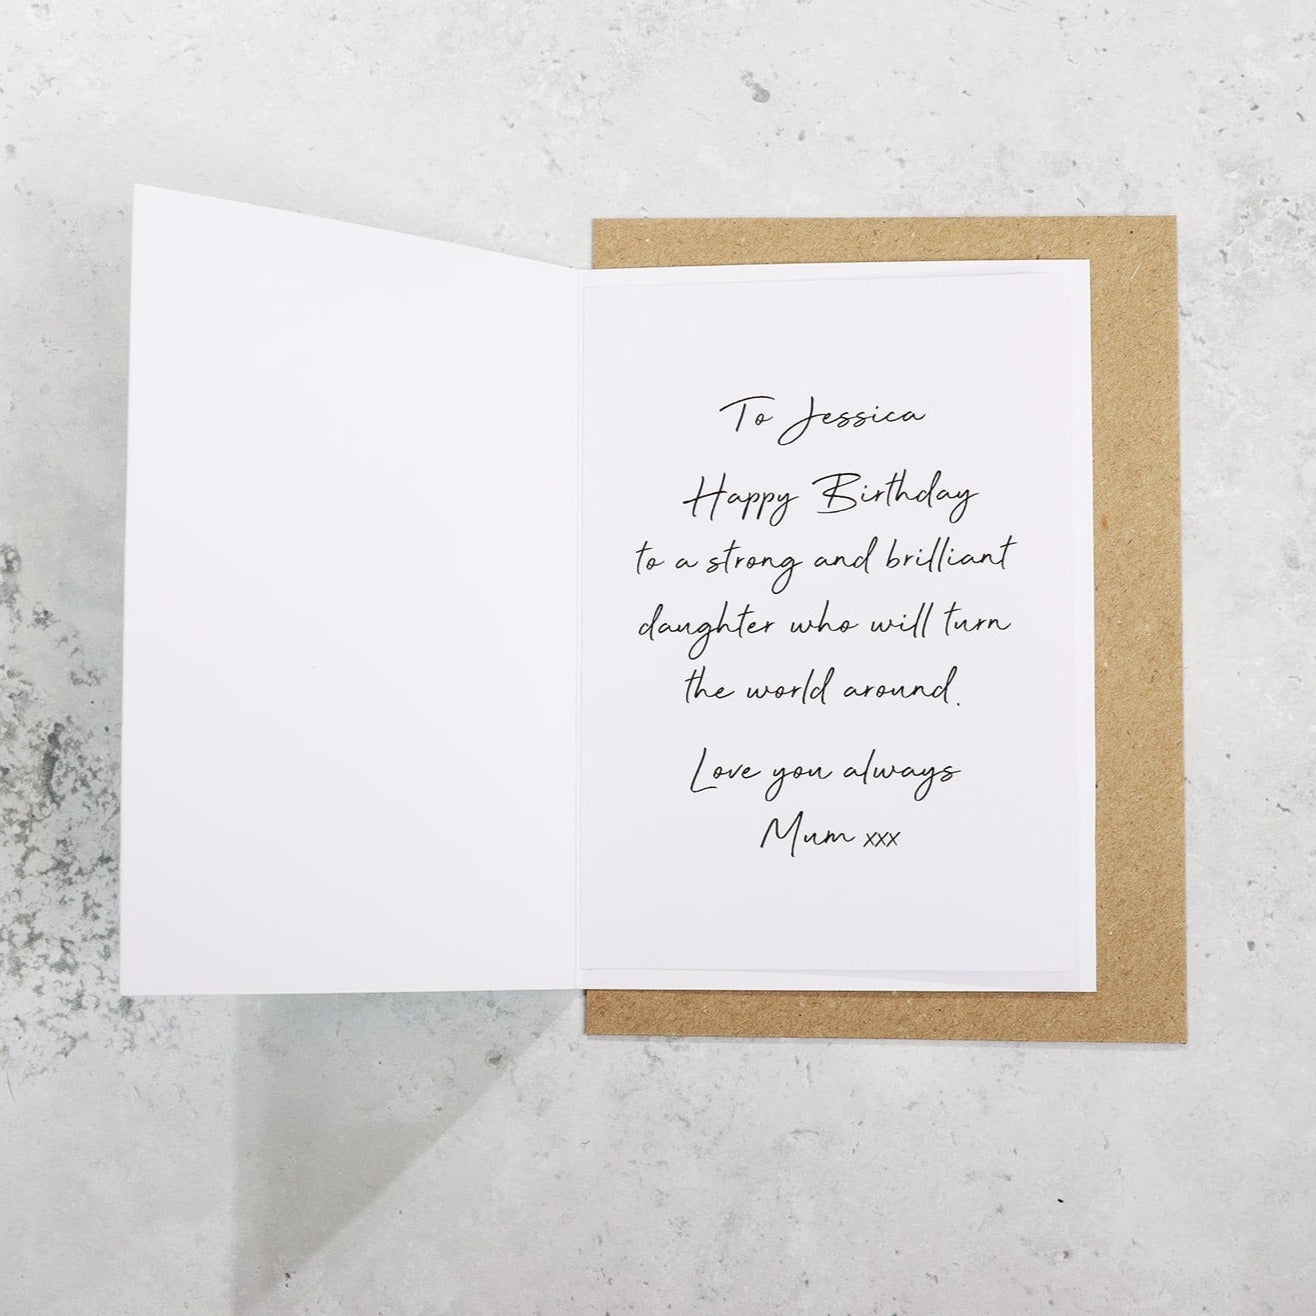 personalised message inside birthday card